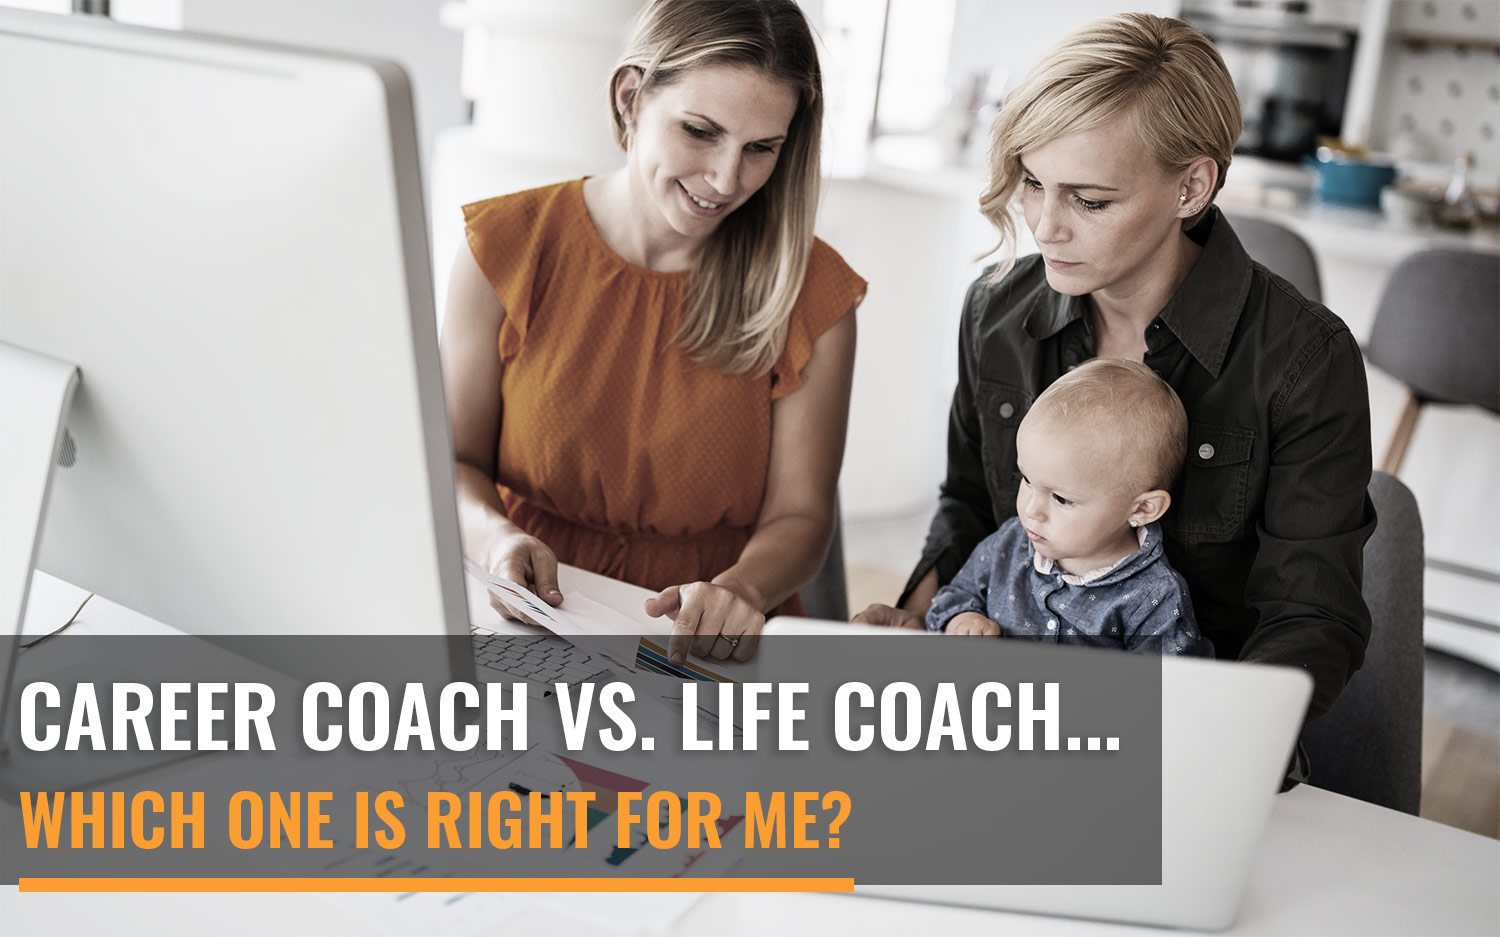 Career Coach vs. Life Coach? Which One is Right for Me?